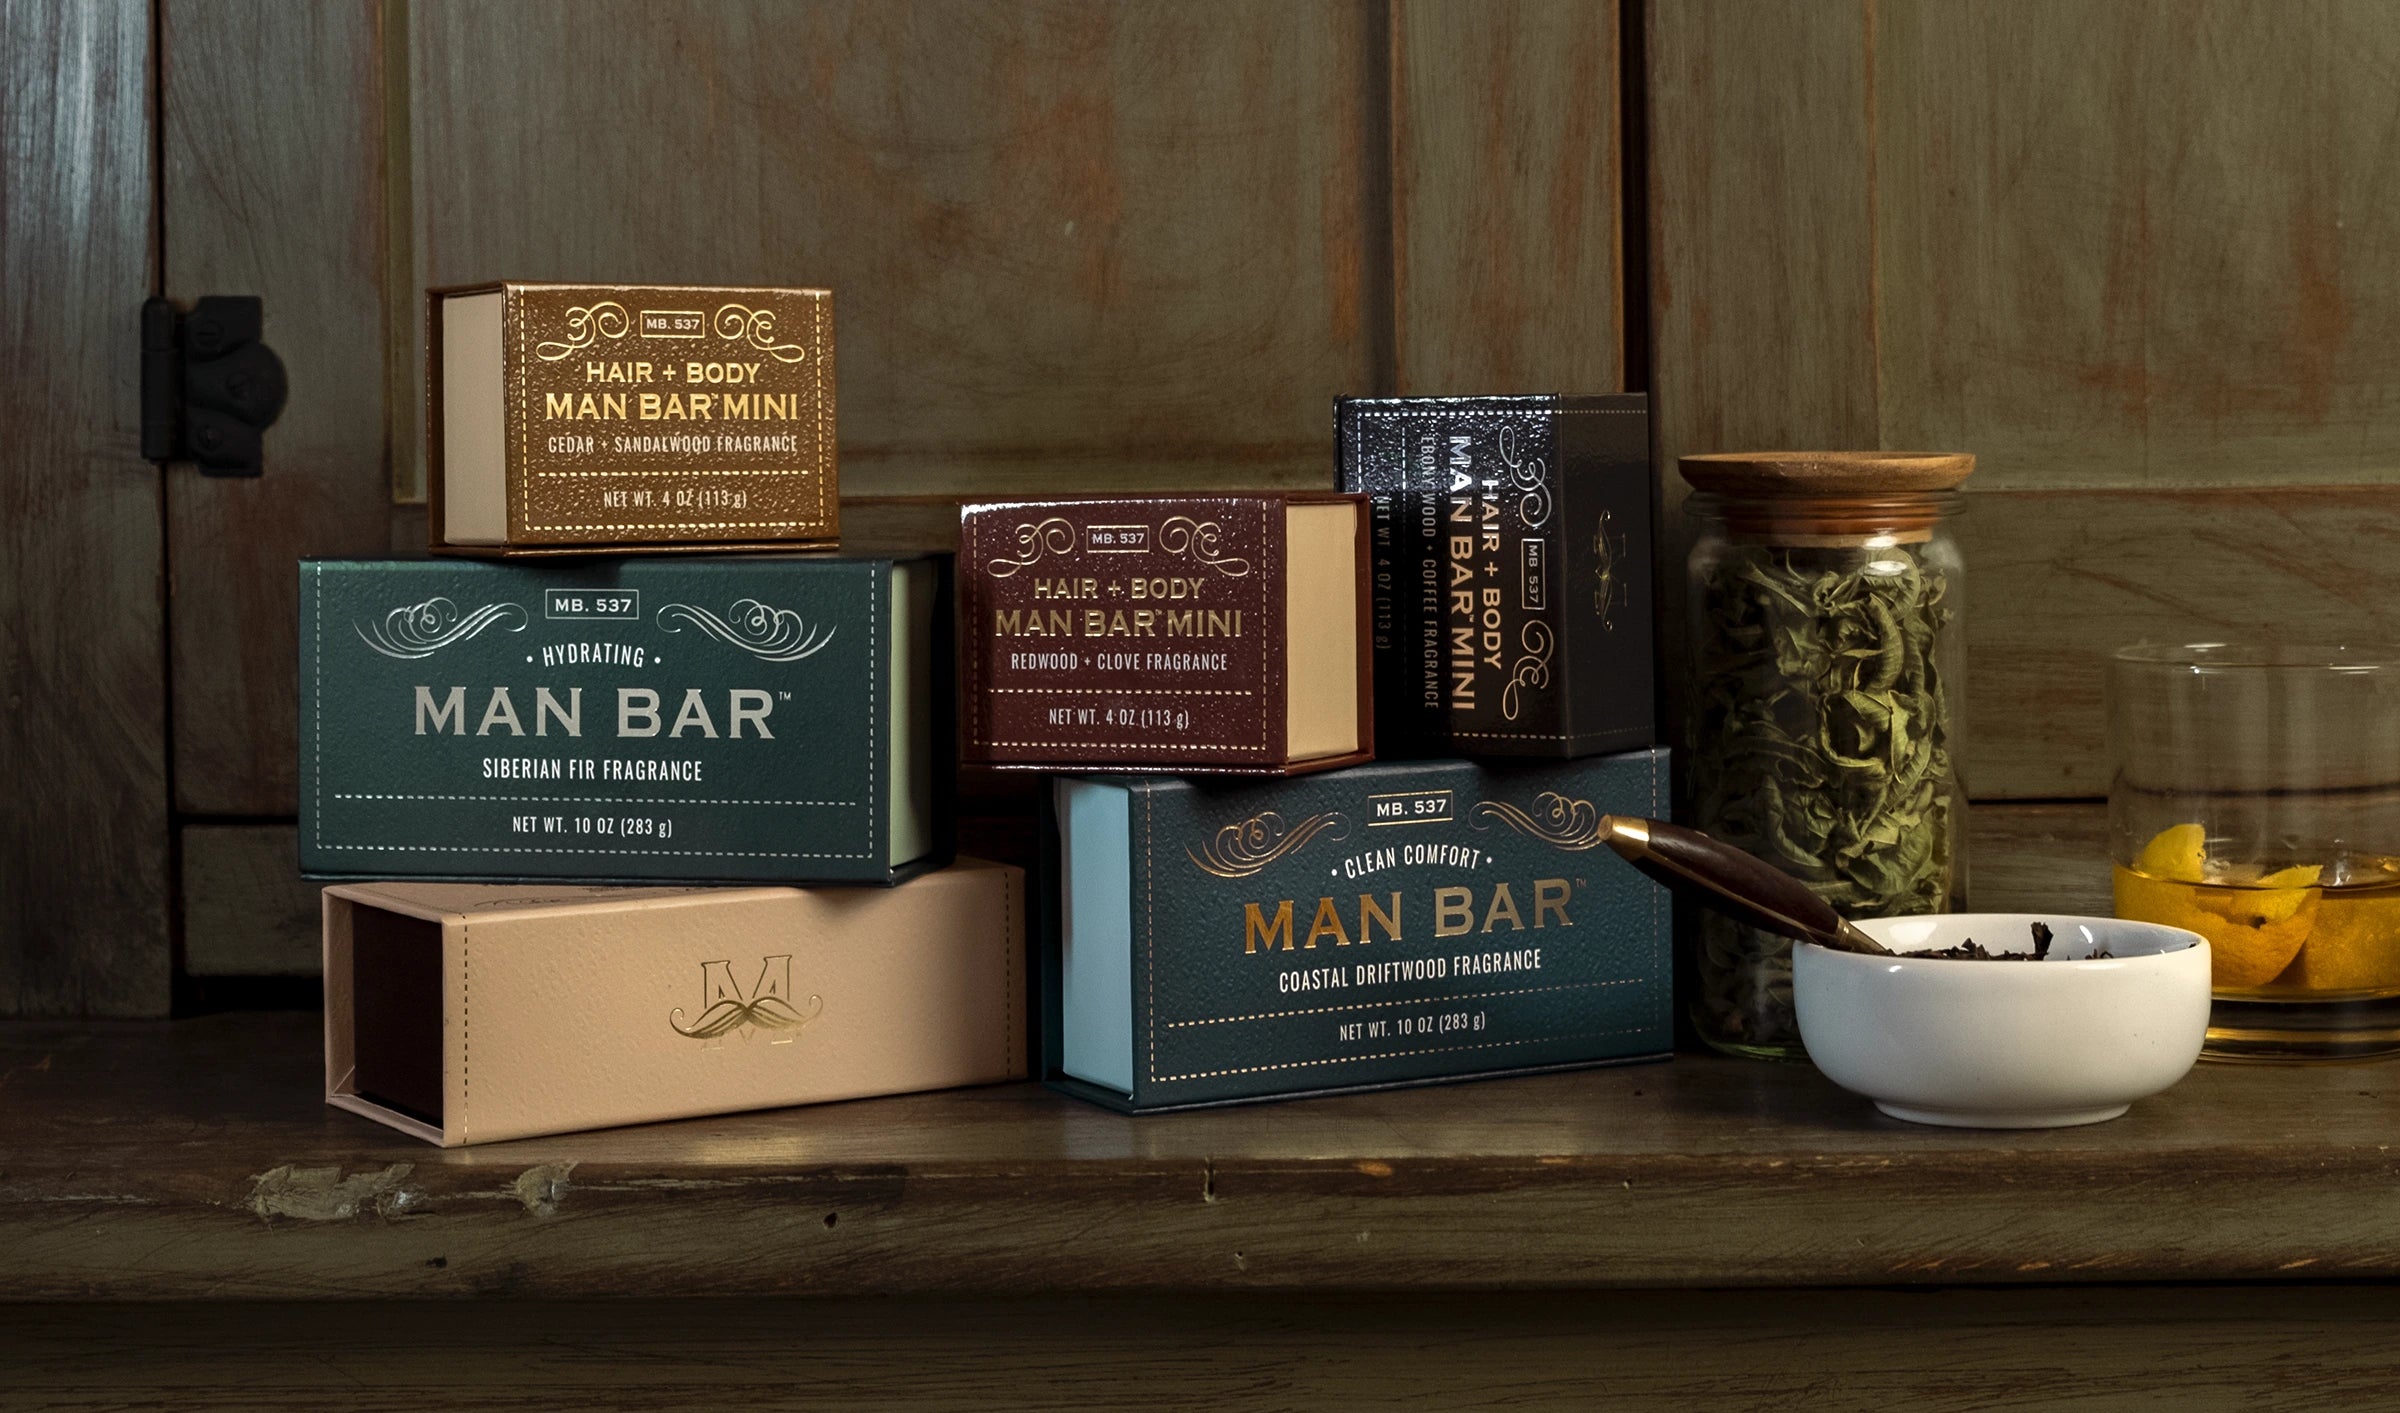 Assortment of Man Bar products